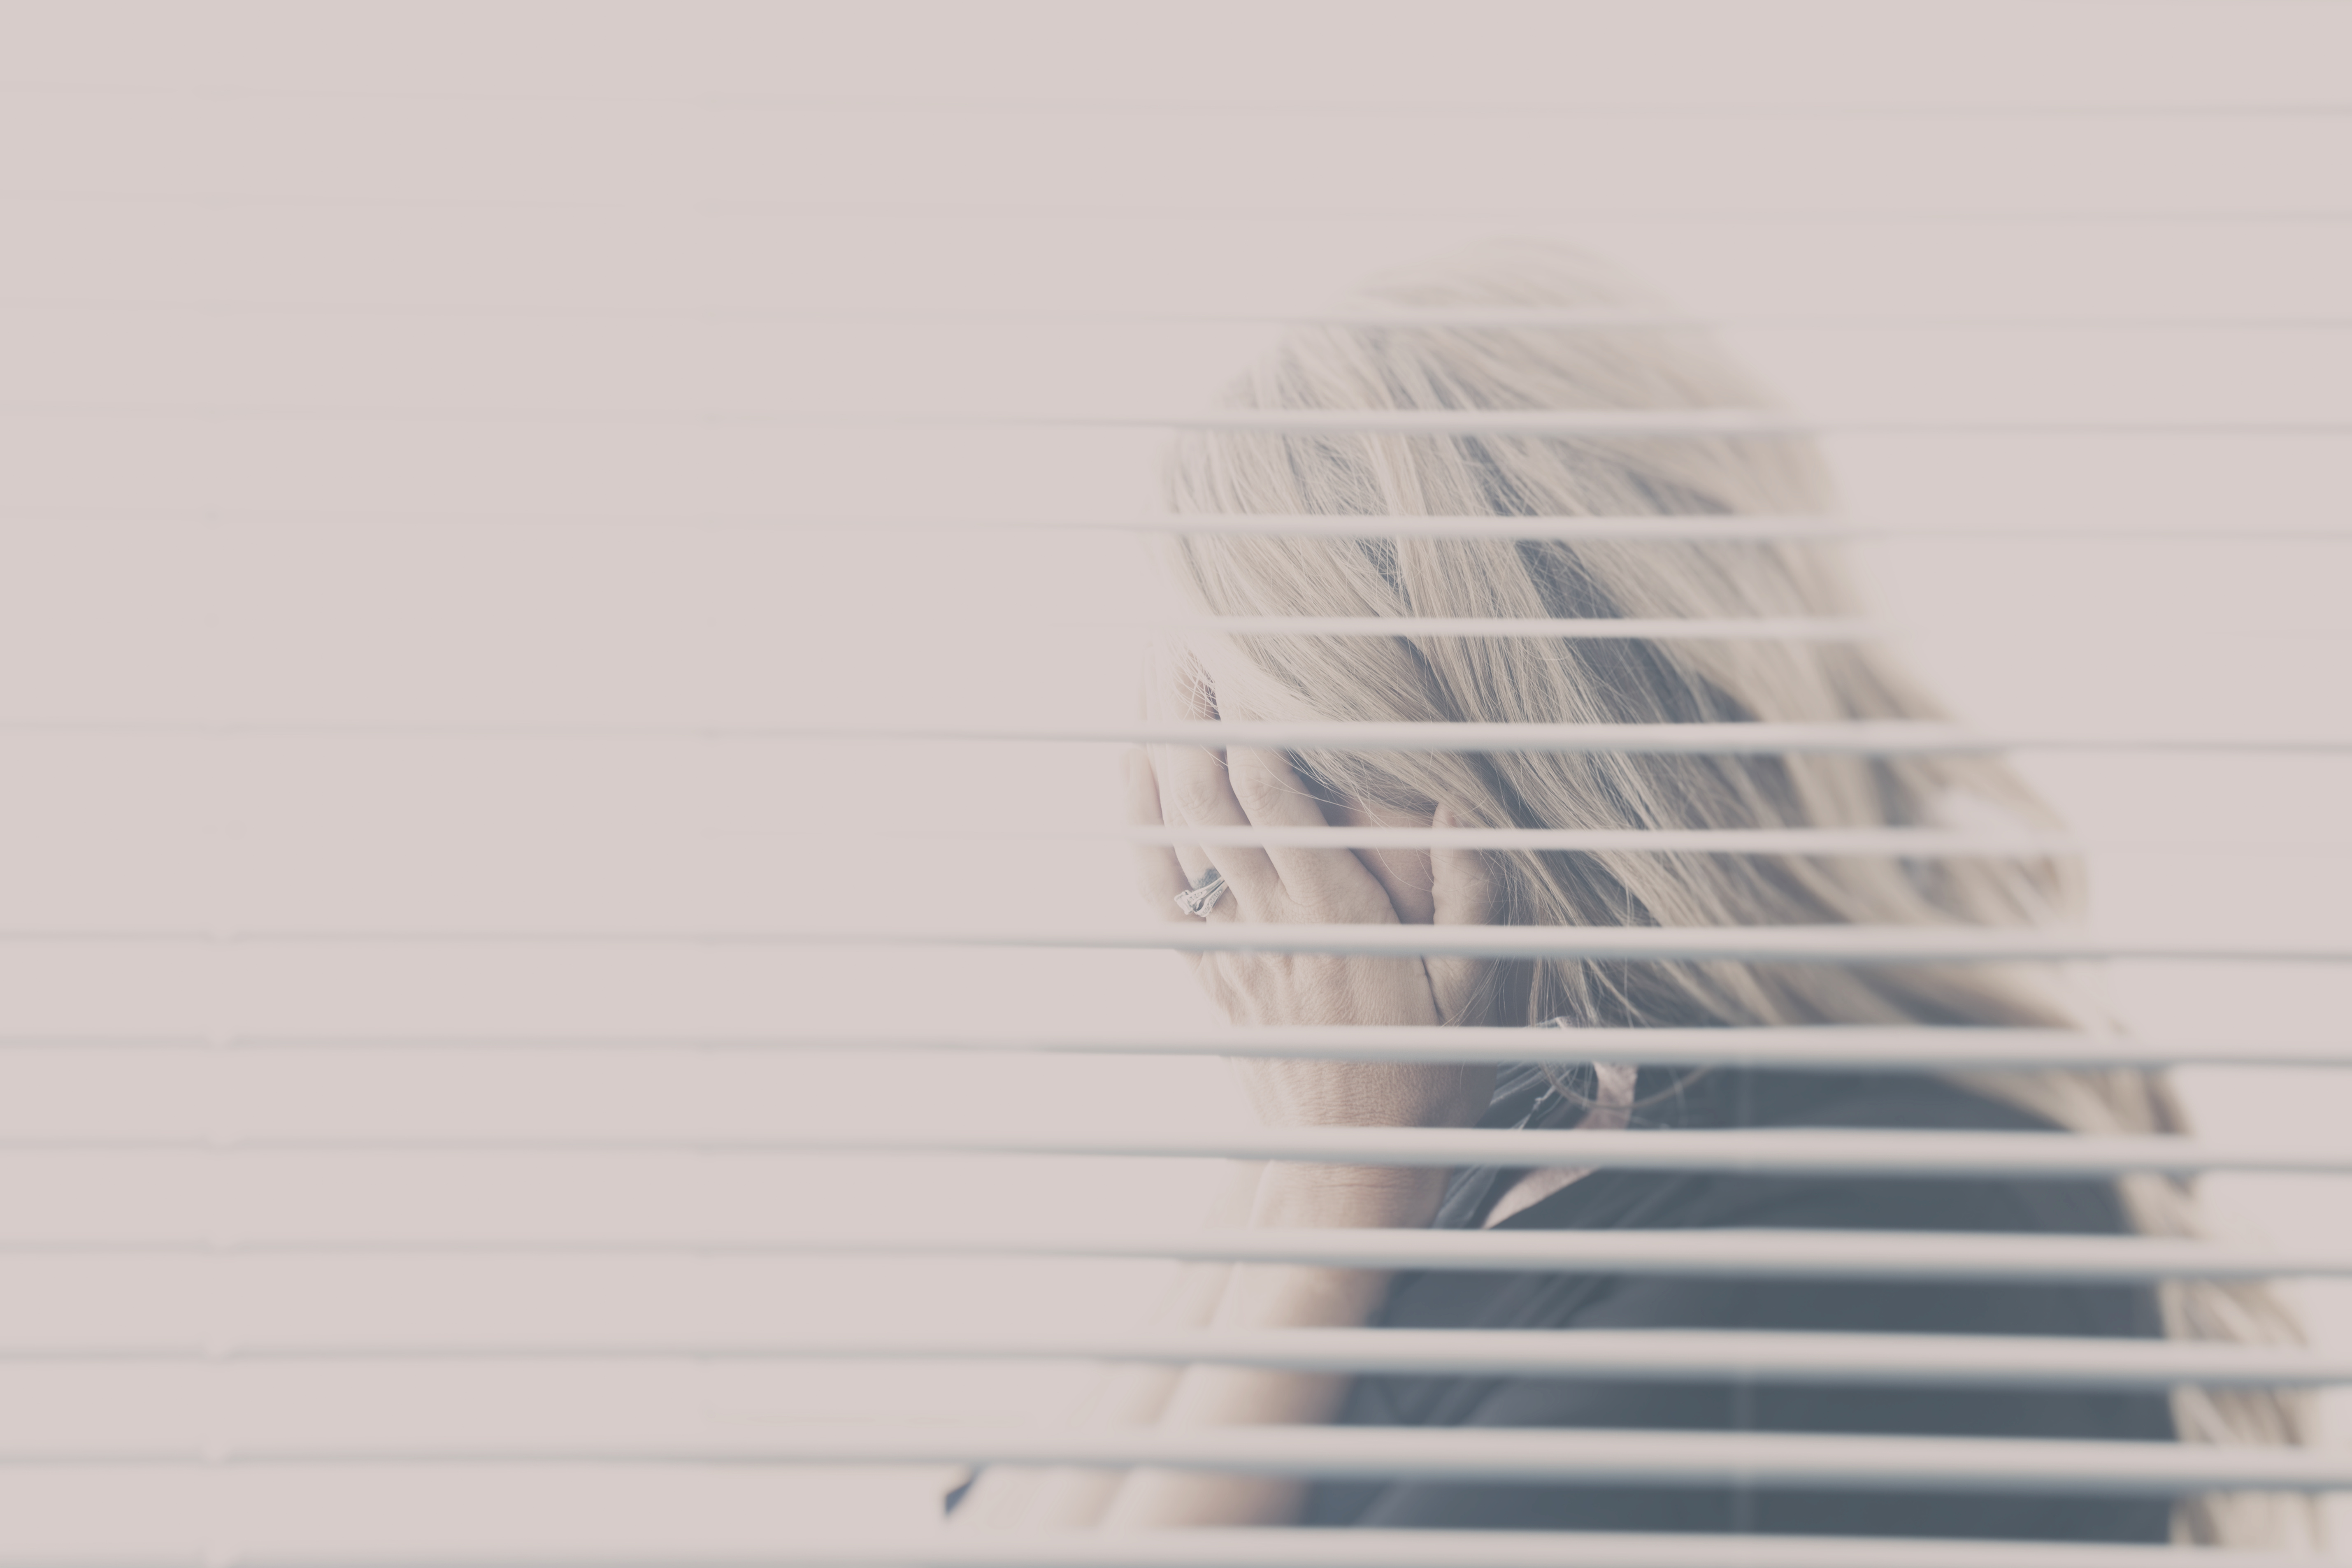 Woman With Blond Hair Seen Hiding Her Face Through A Window With Blinds